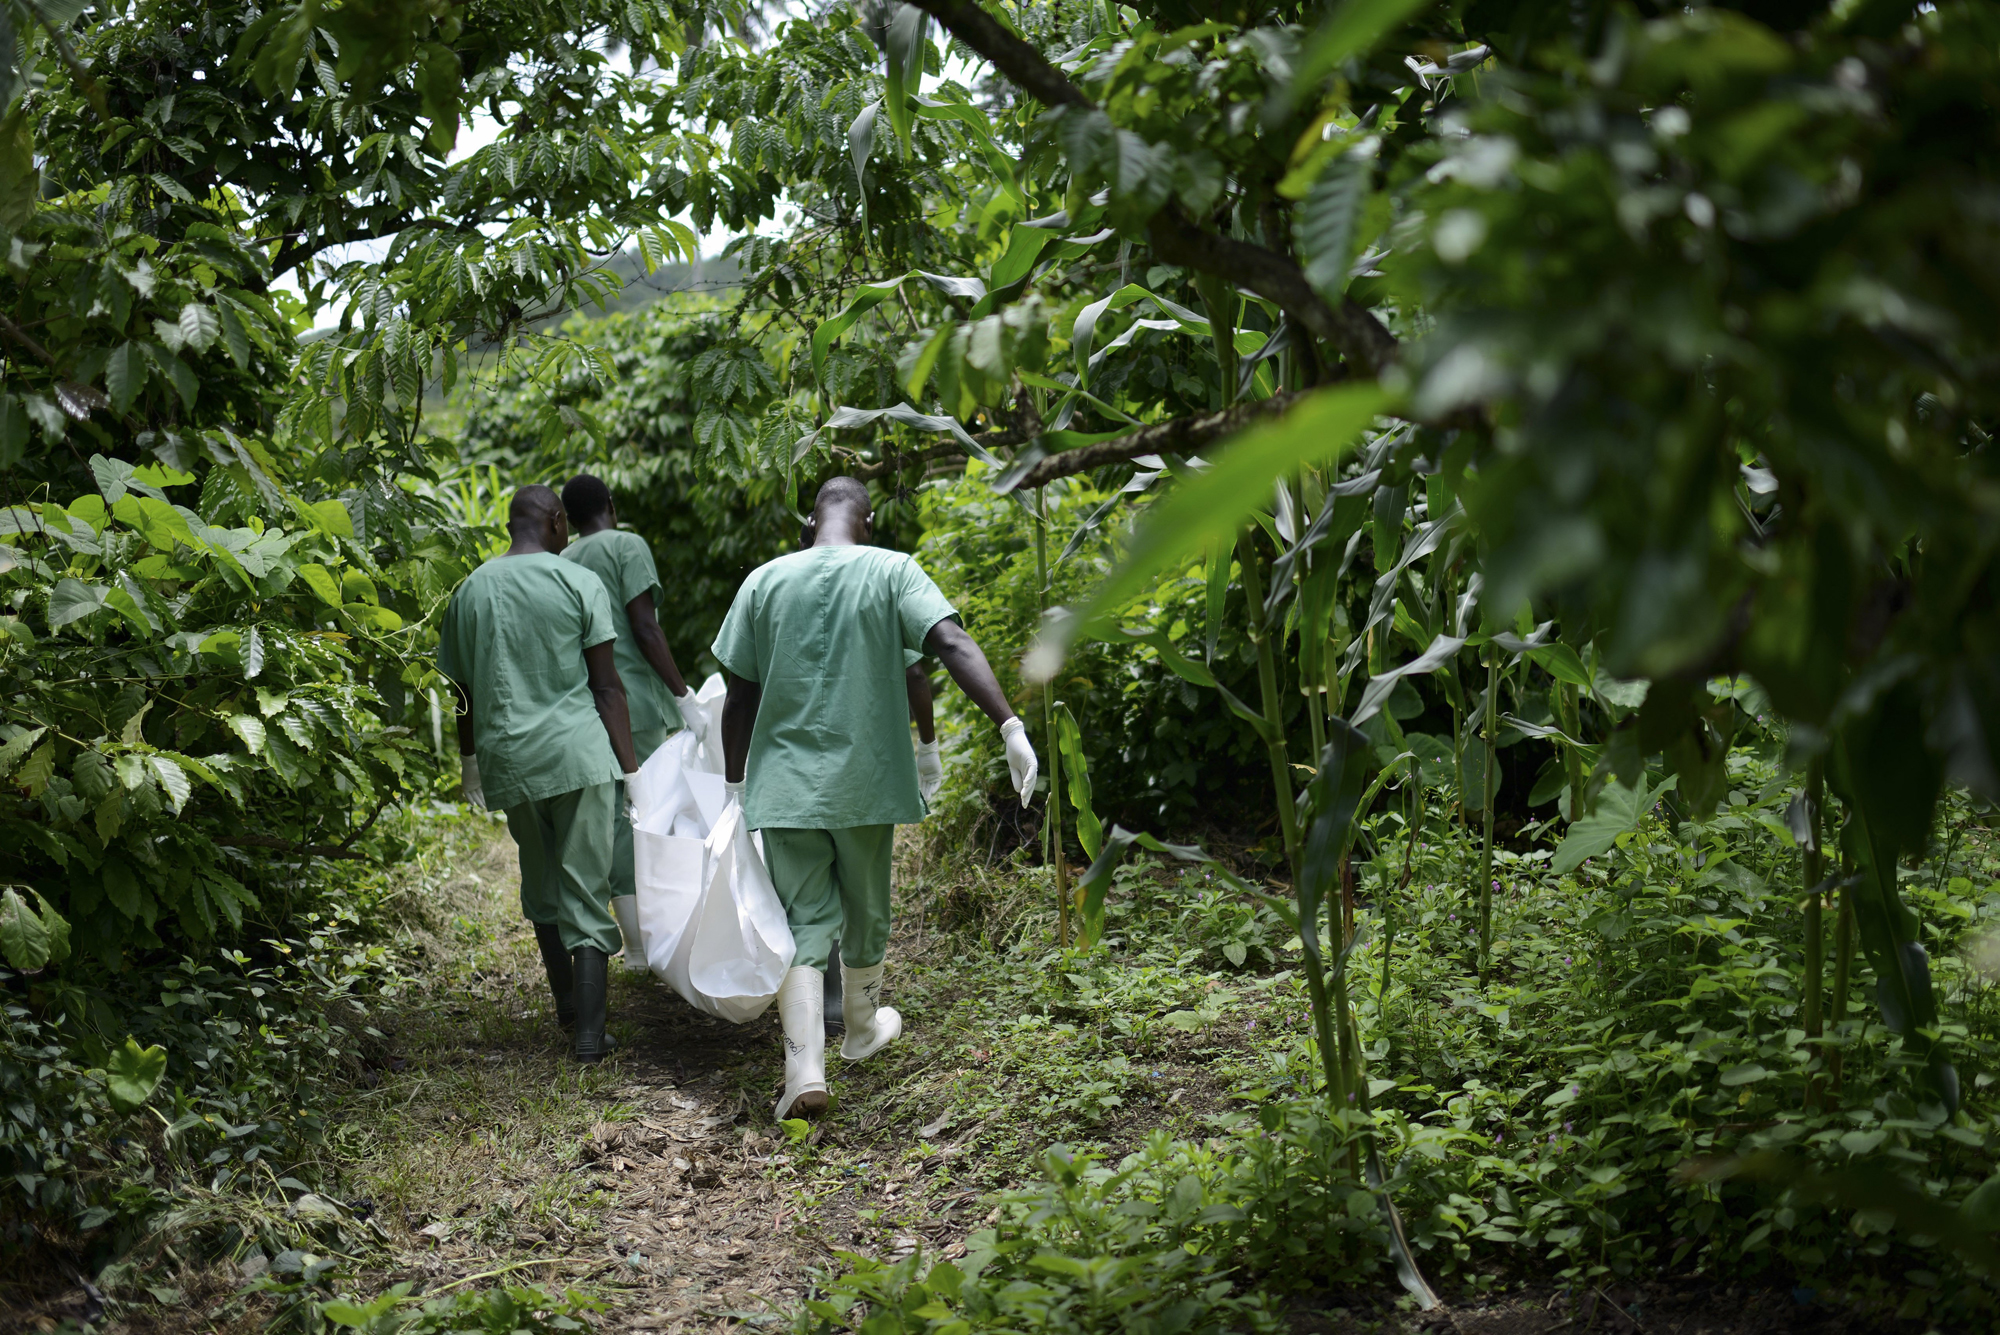 Red Cross workers carry the body of Marie Conde, 14, who died of Ebola, through the bush in Koundony, Guinea.